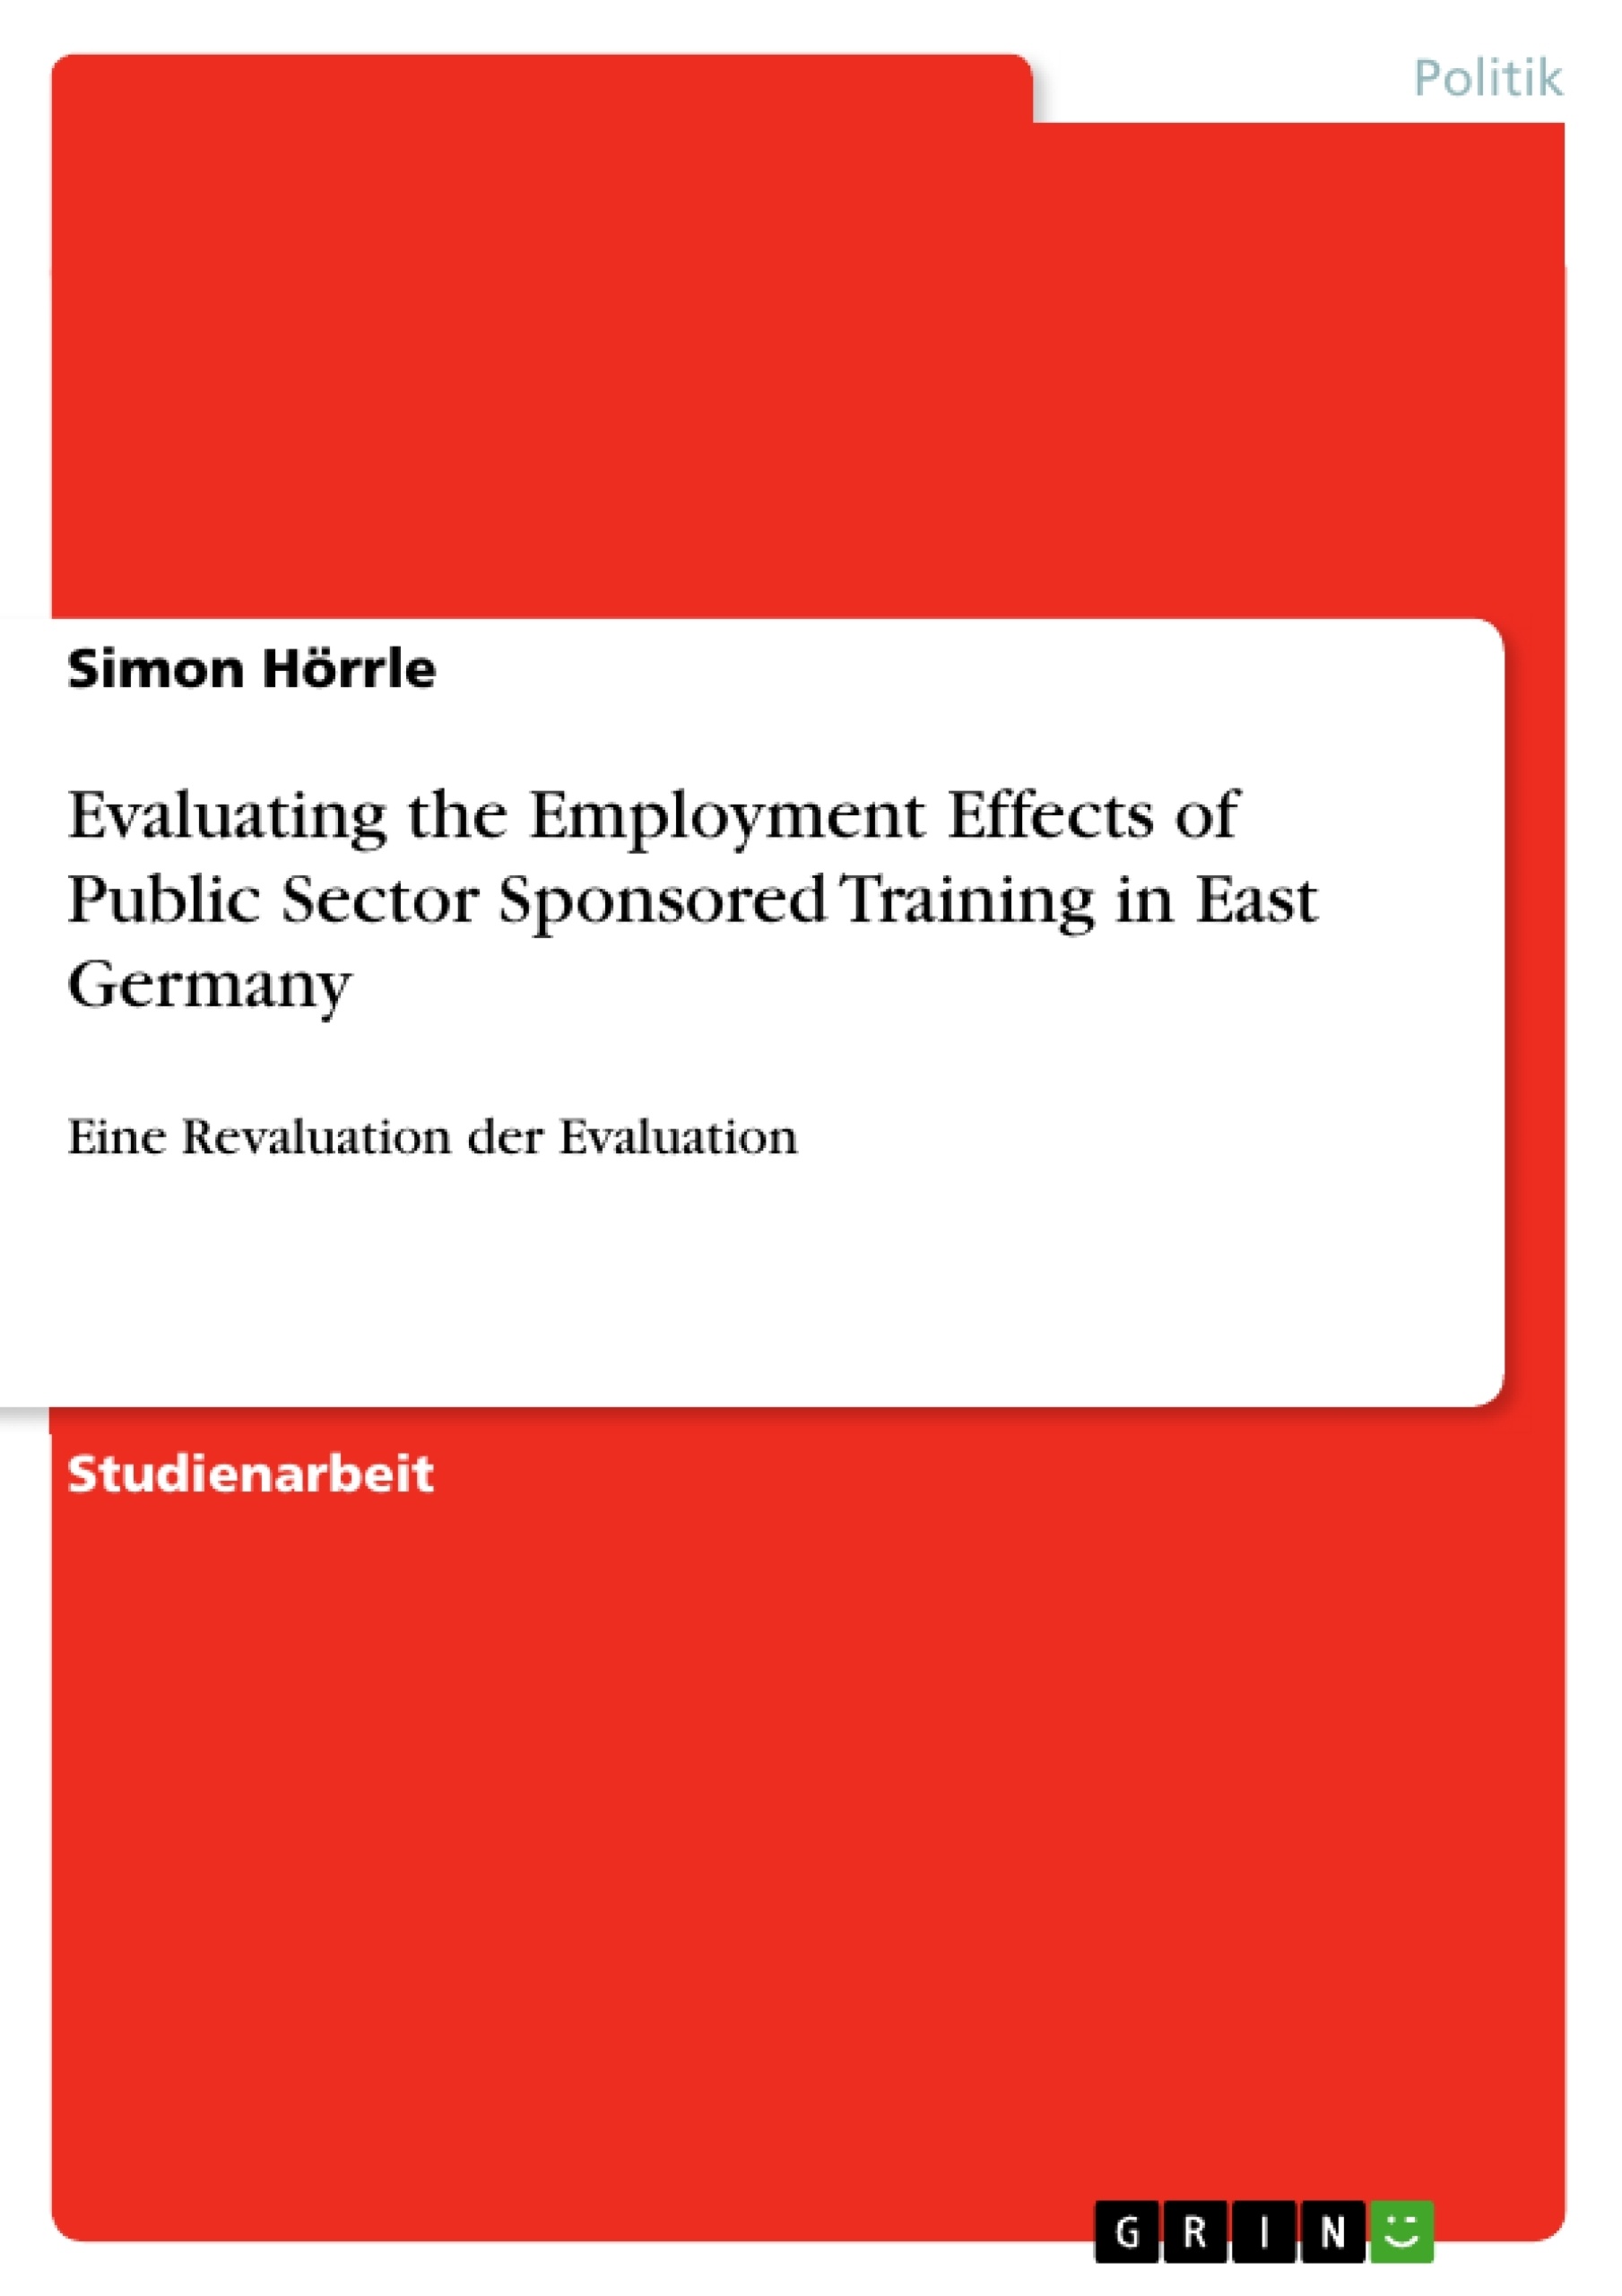 Título: Evaluating the Employment Effects of Public Sector Sponsored Training in East Germany